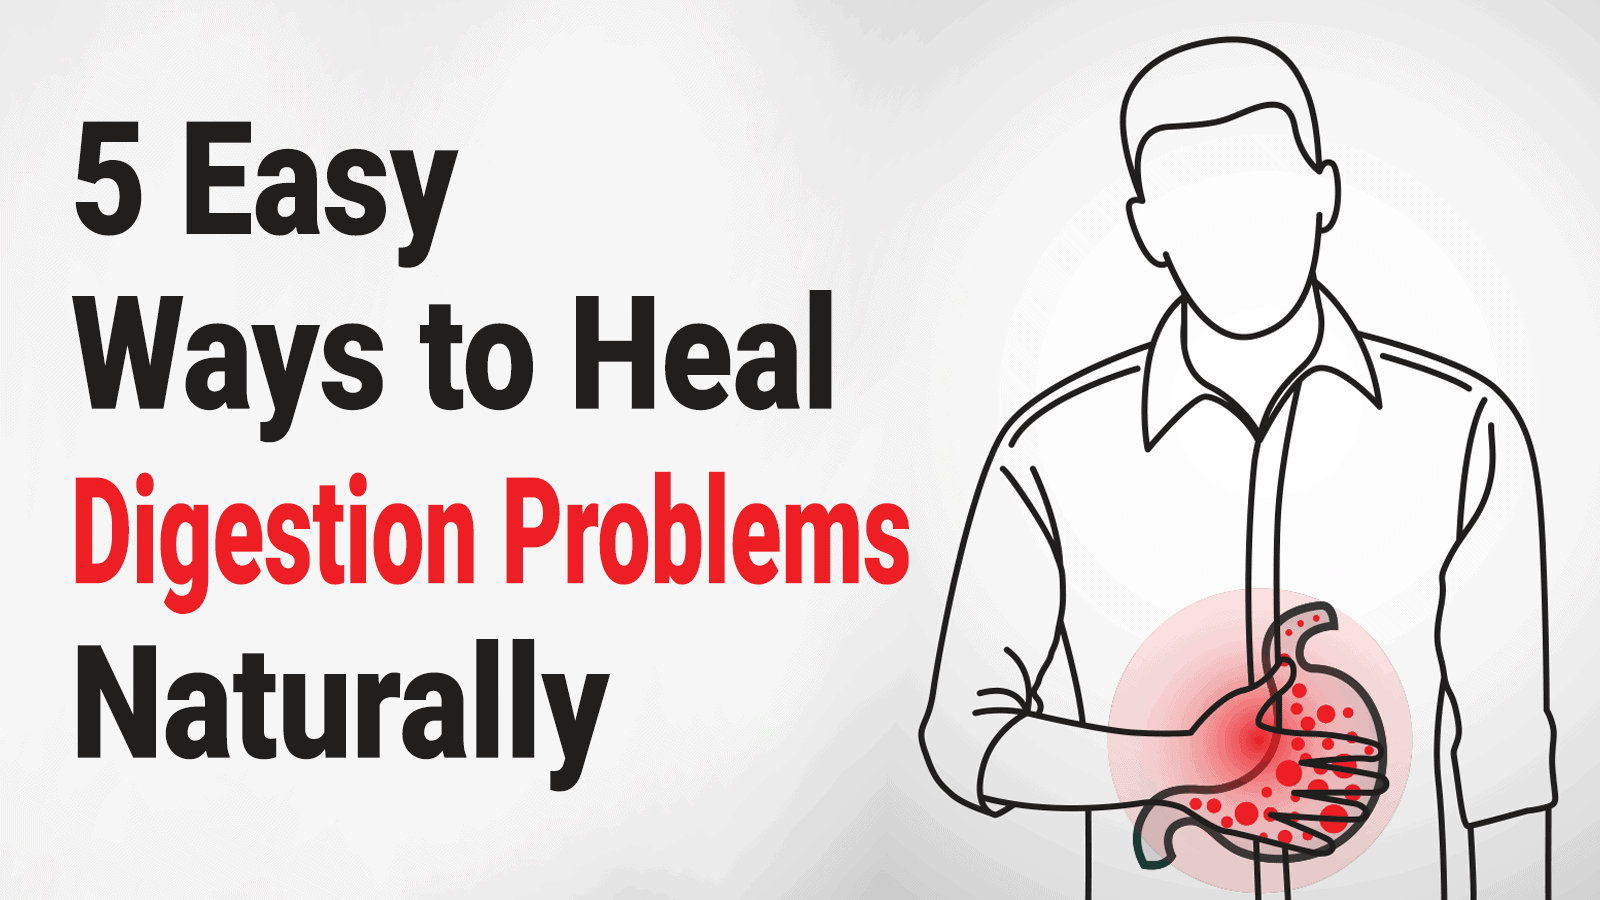 5 Easy Ways to Heal Digestion Problems Naturally